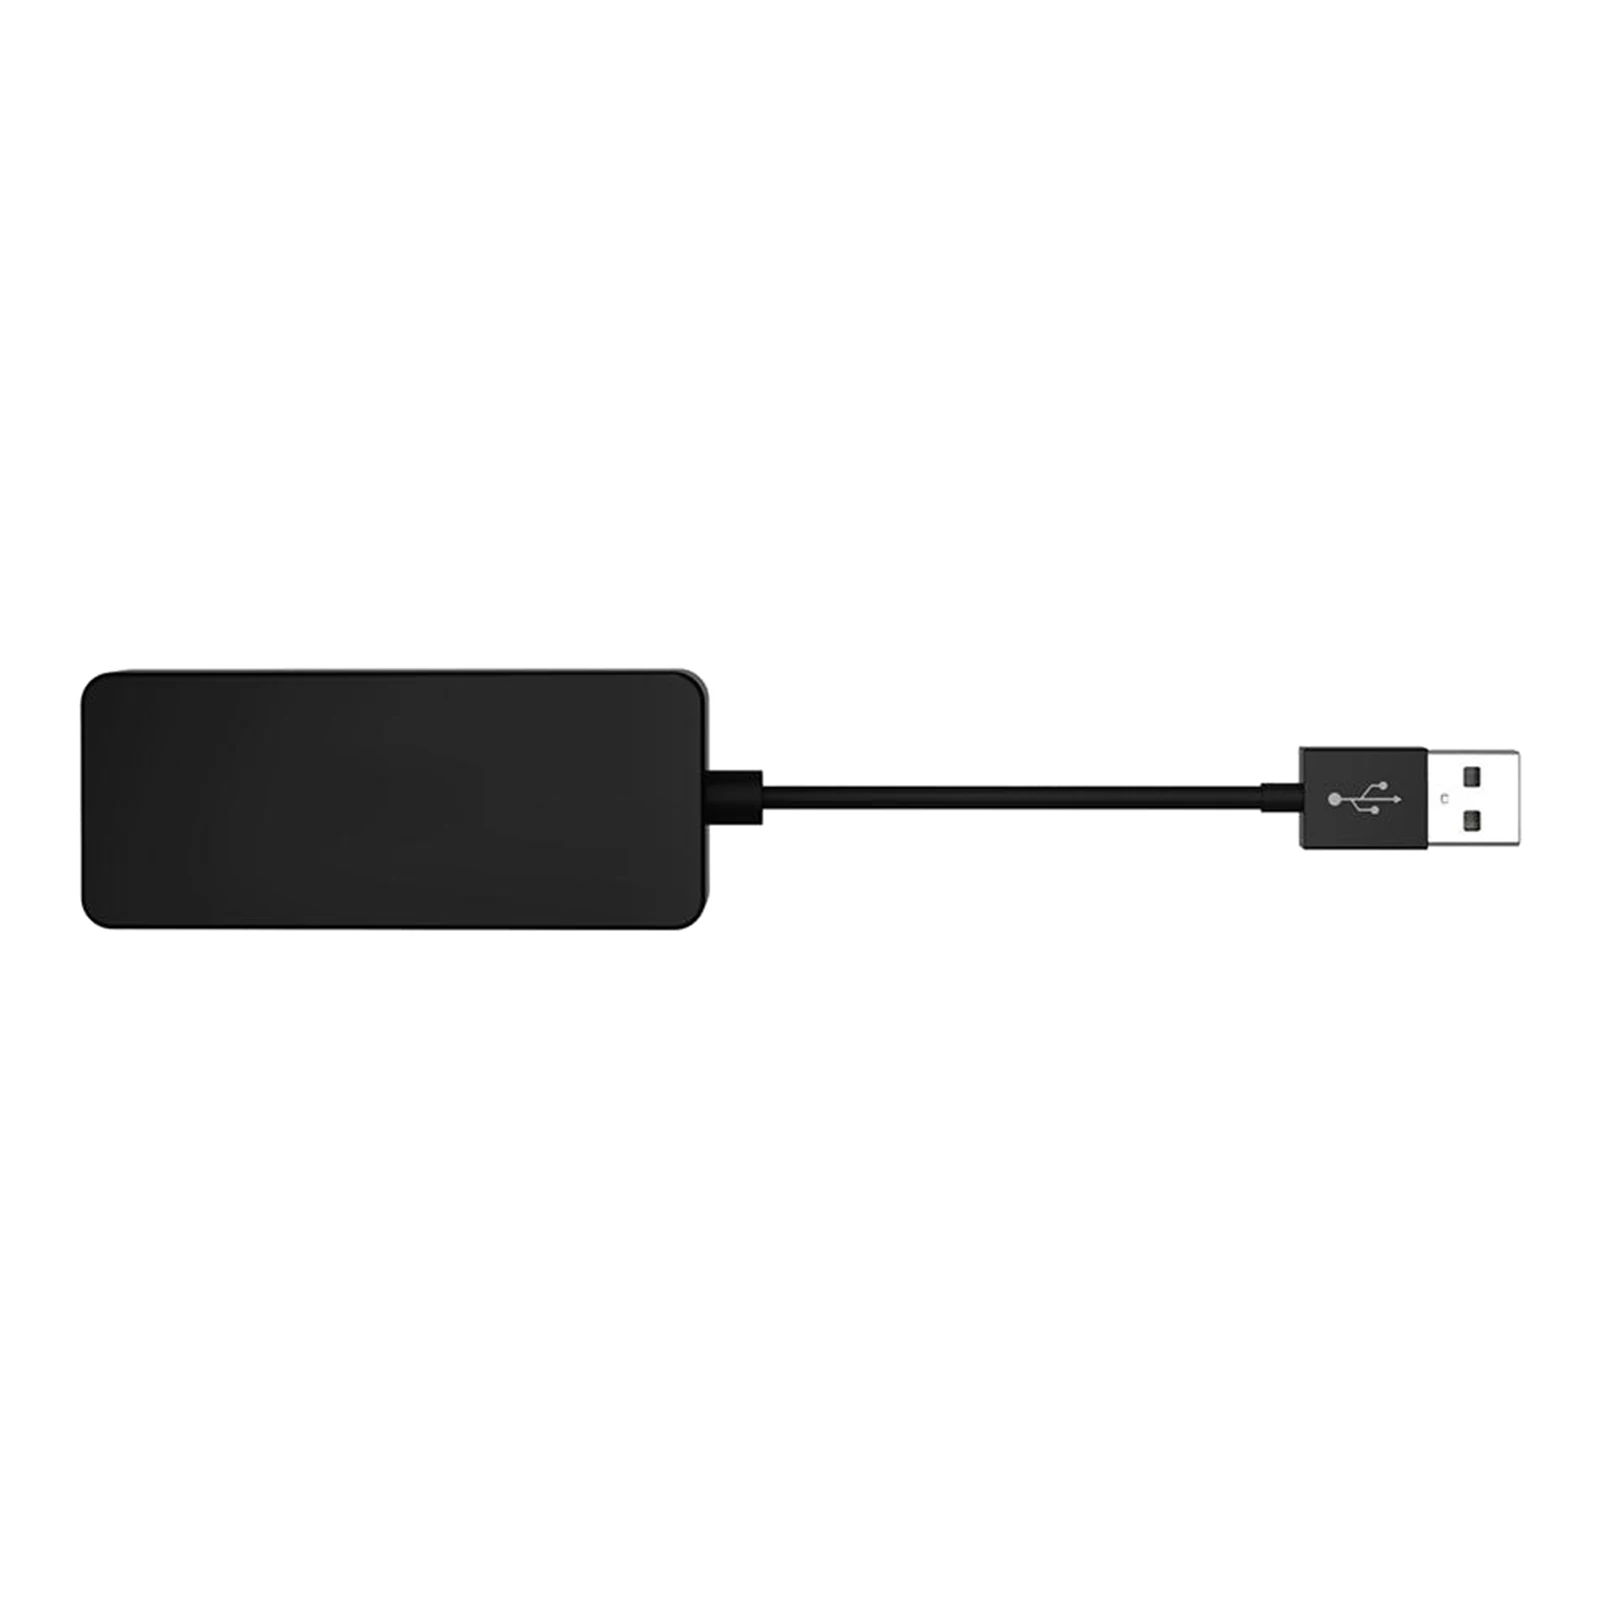 Wired Auto Smart Link USB Dongle for Android Navigation Player